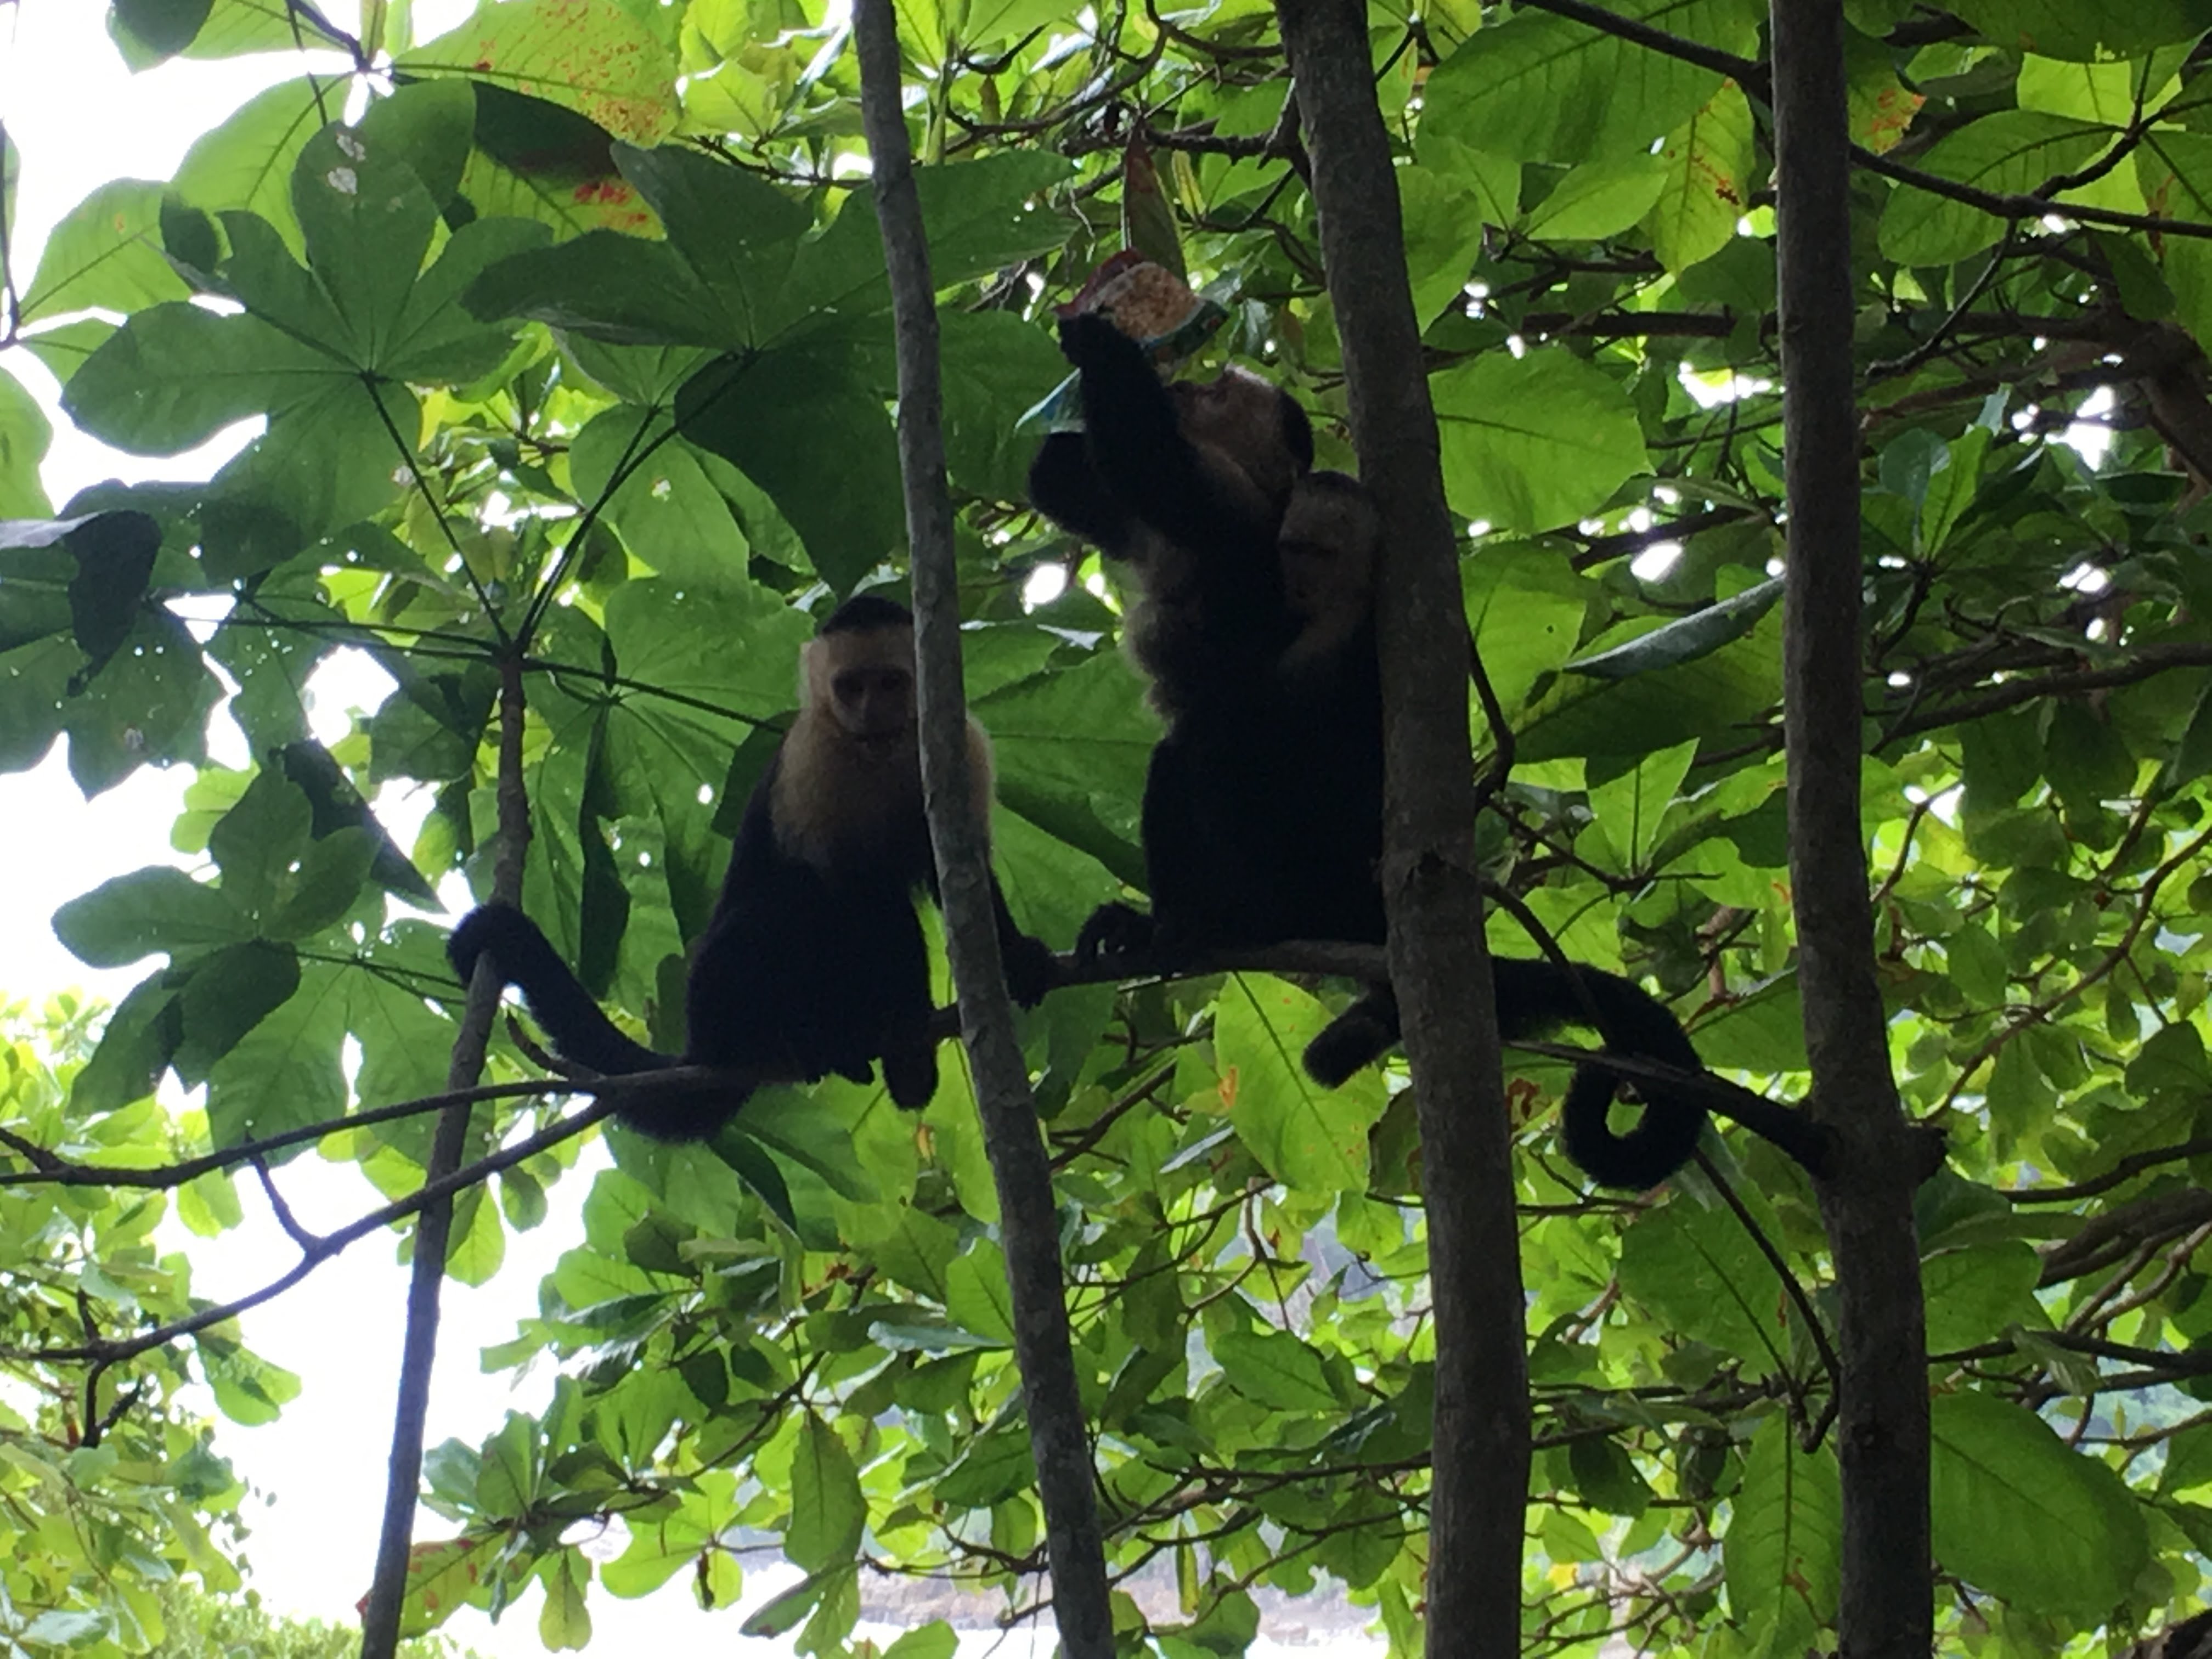 Monkeys eating mayonnaise (come on people, pick up your trash!)